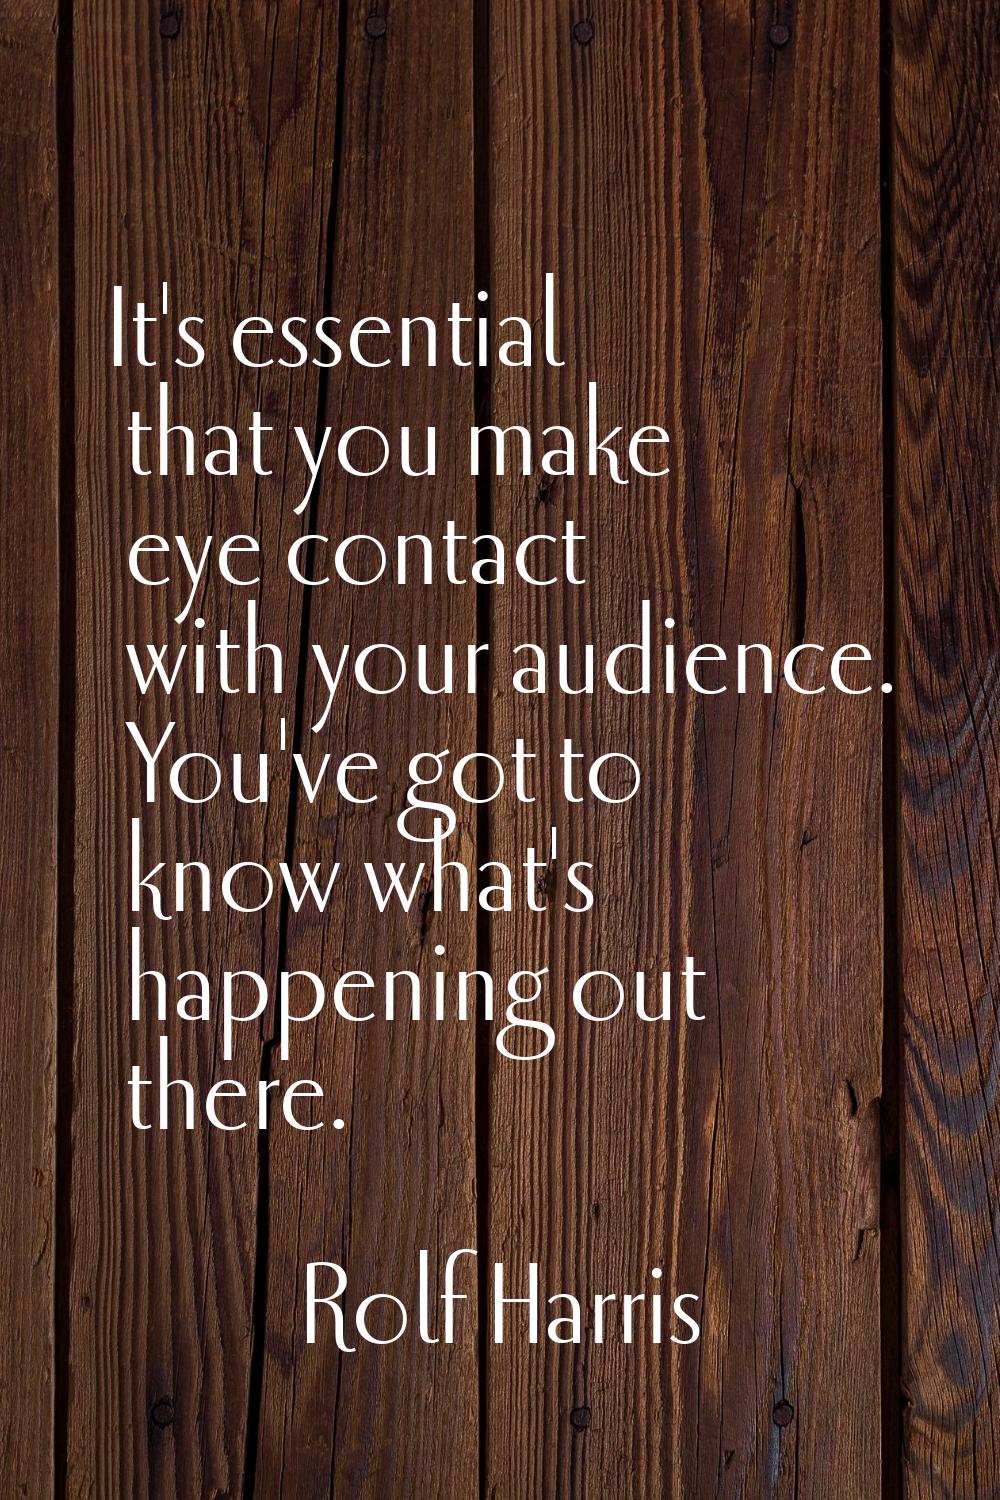 It's essential that you make eye contact with your audience. You've got to know what's happening ou